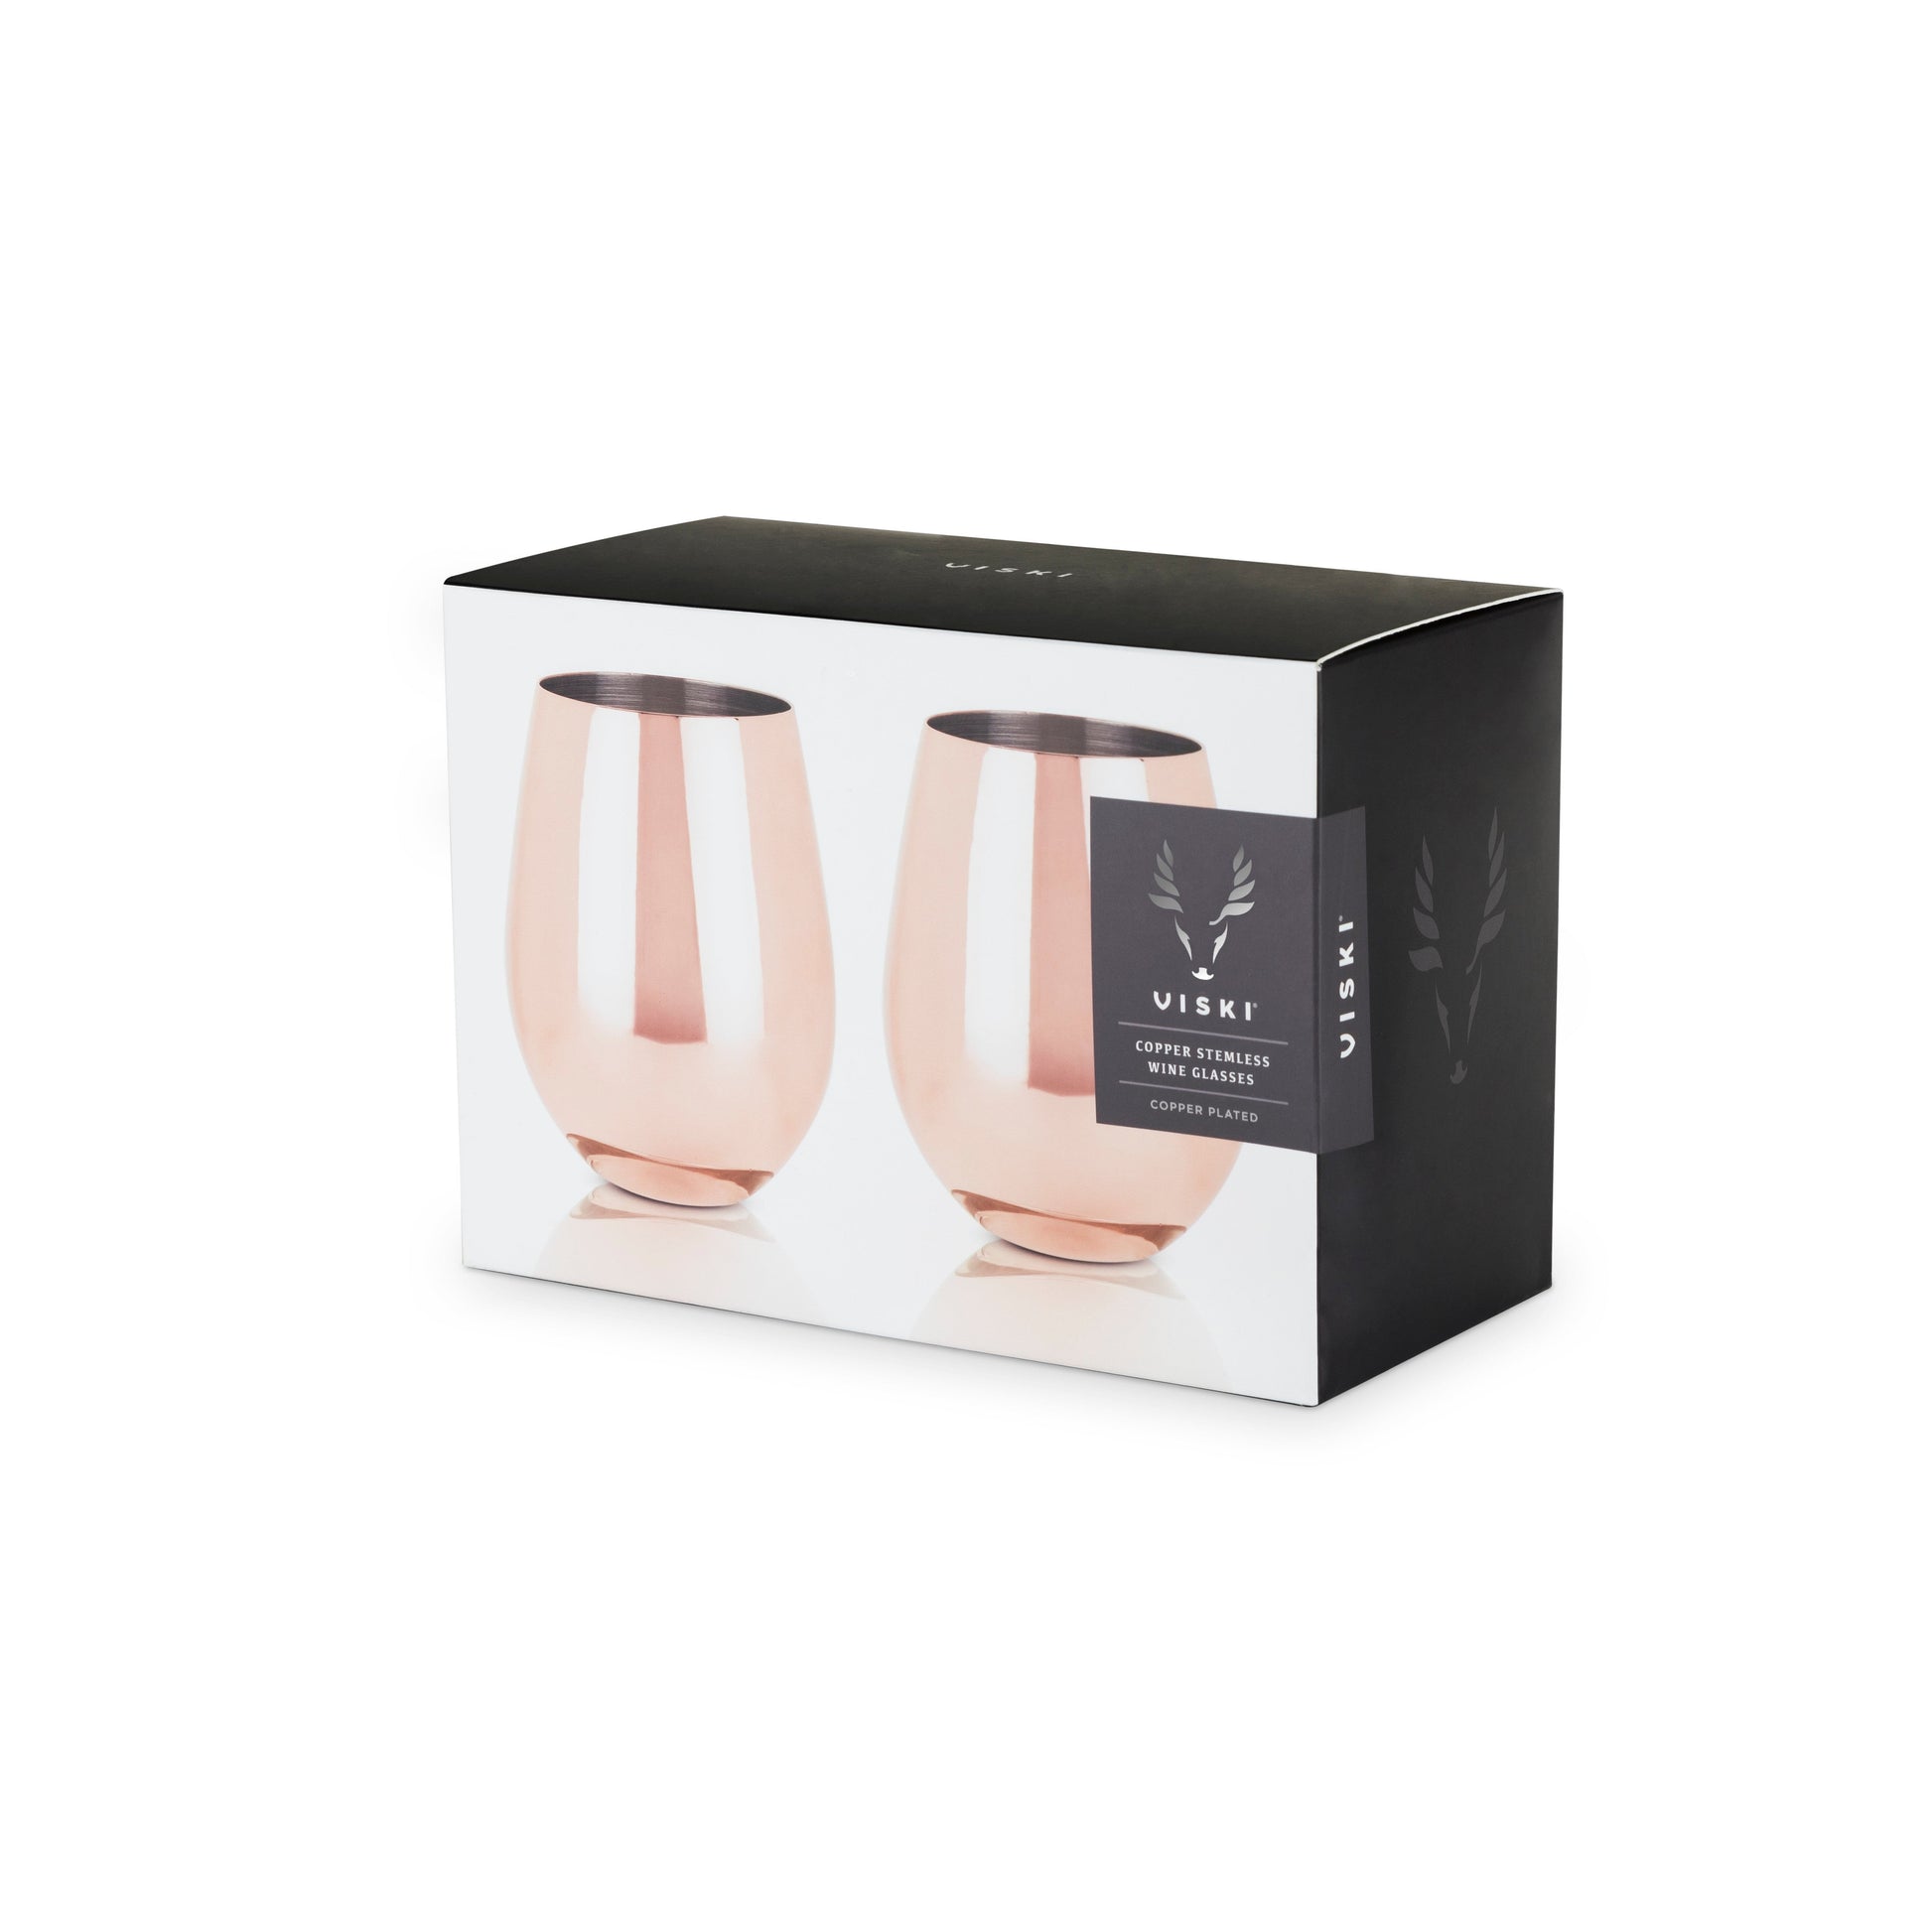 Savor Sauvignon Blanc and Chardonnay from an eye-catching pair of stemless copper tumblers. Each polished and perfectly rounded to fit the curve of your palm, these mirror-finished metal glasses collect and intensify the aromas of your drink for an appetizing taste every time. A fun way to show off your wine-tasting skills! Throw in a few wine facts and you've got yourself the makings of a successful wine night.